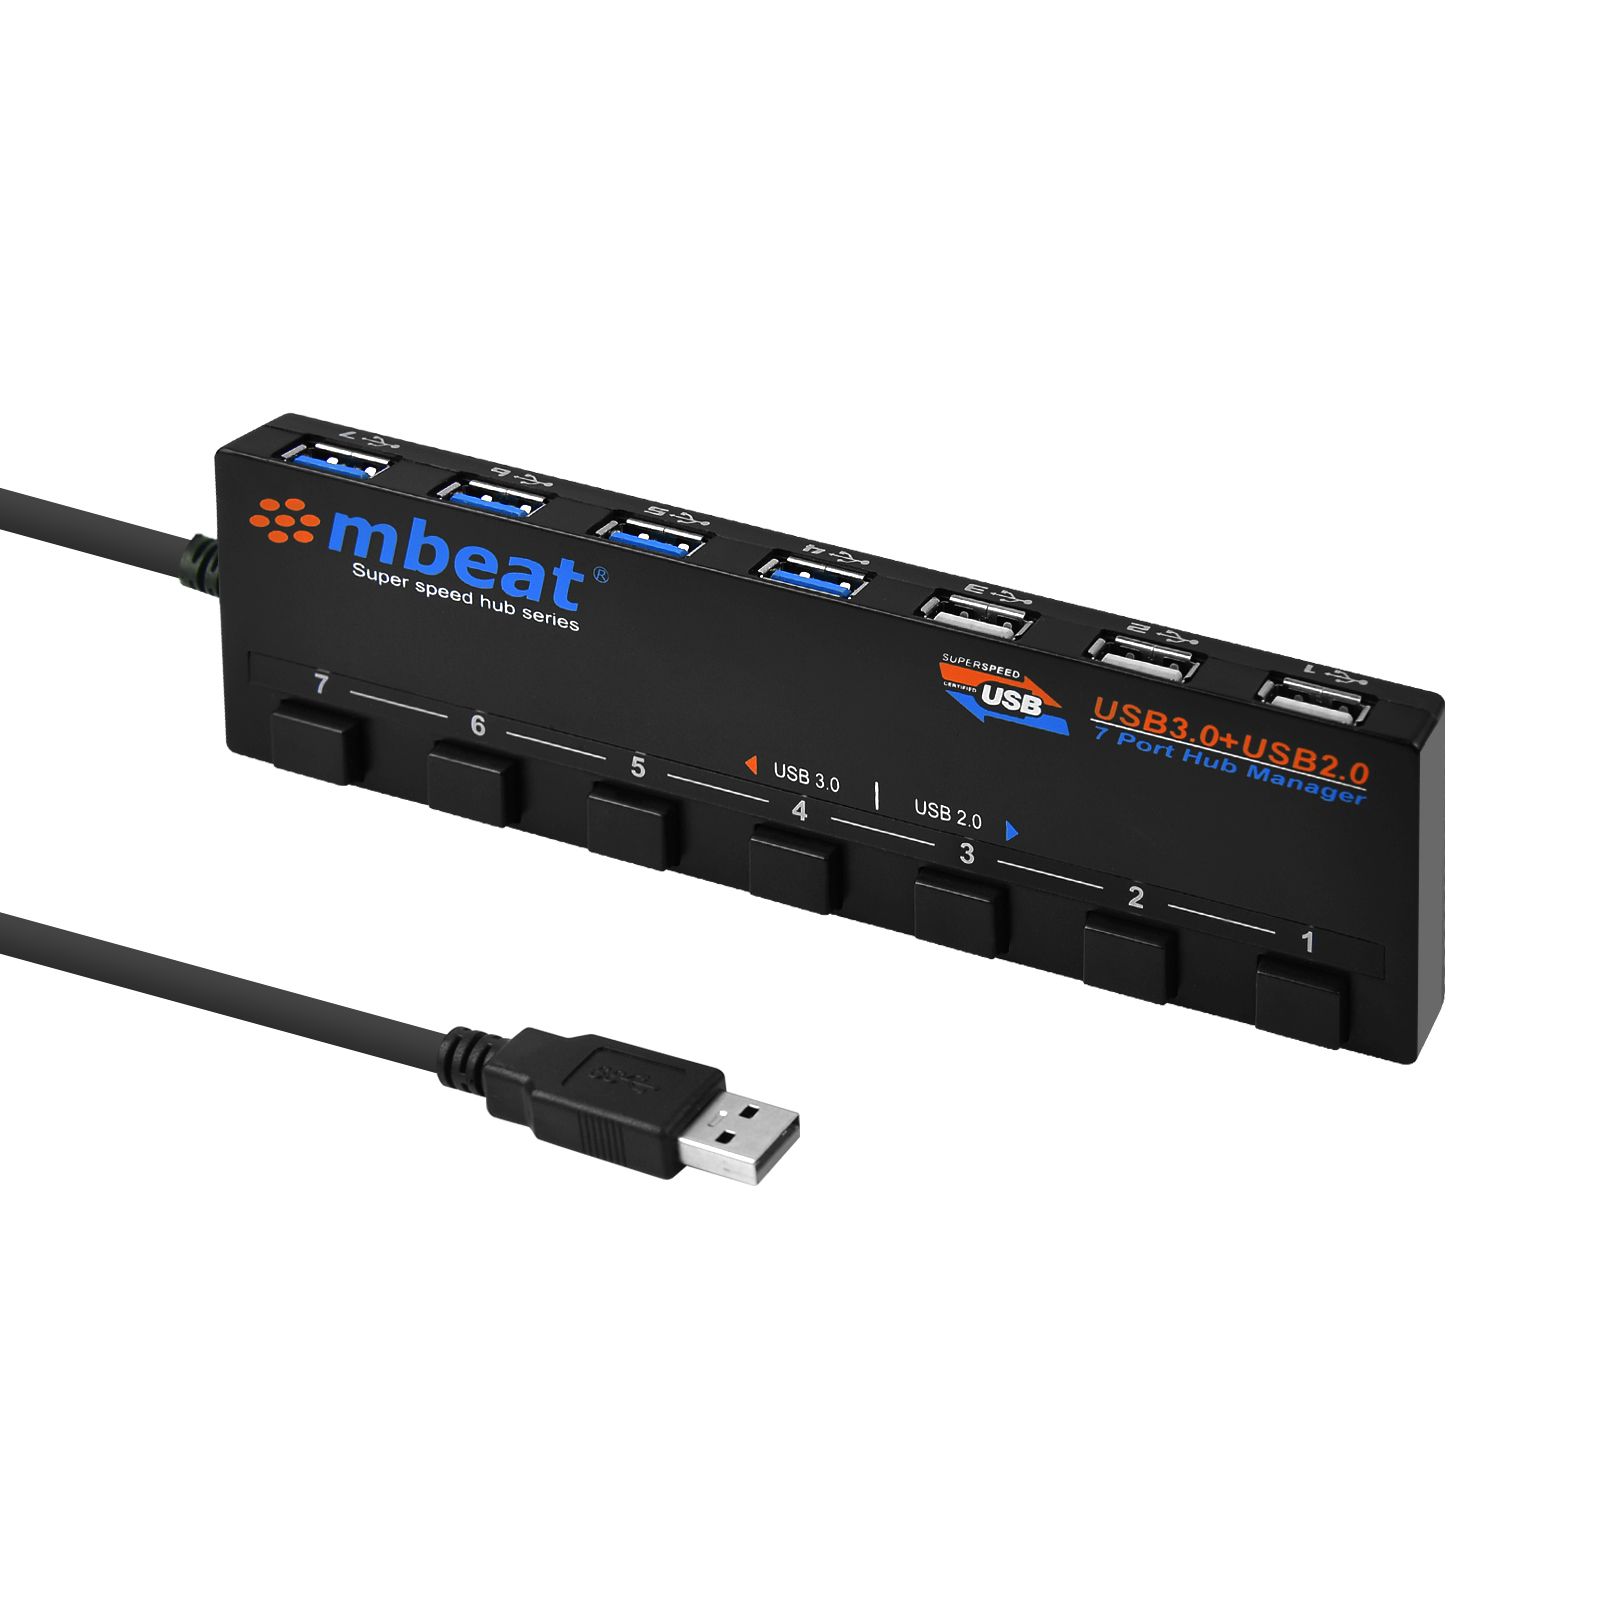 Adapters/MBEAT: mbeatÂ®, 7-Port, USB, 3.0, &, USB, 2.0, Powered, Hub, Manager, with, Switches, -, 4x, USB, 3.0, with, 5Gbps/3x, USB, 2.0, with, 2.4Ghz(480Mbp, 